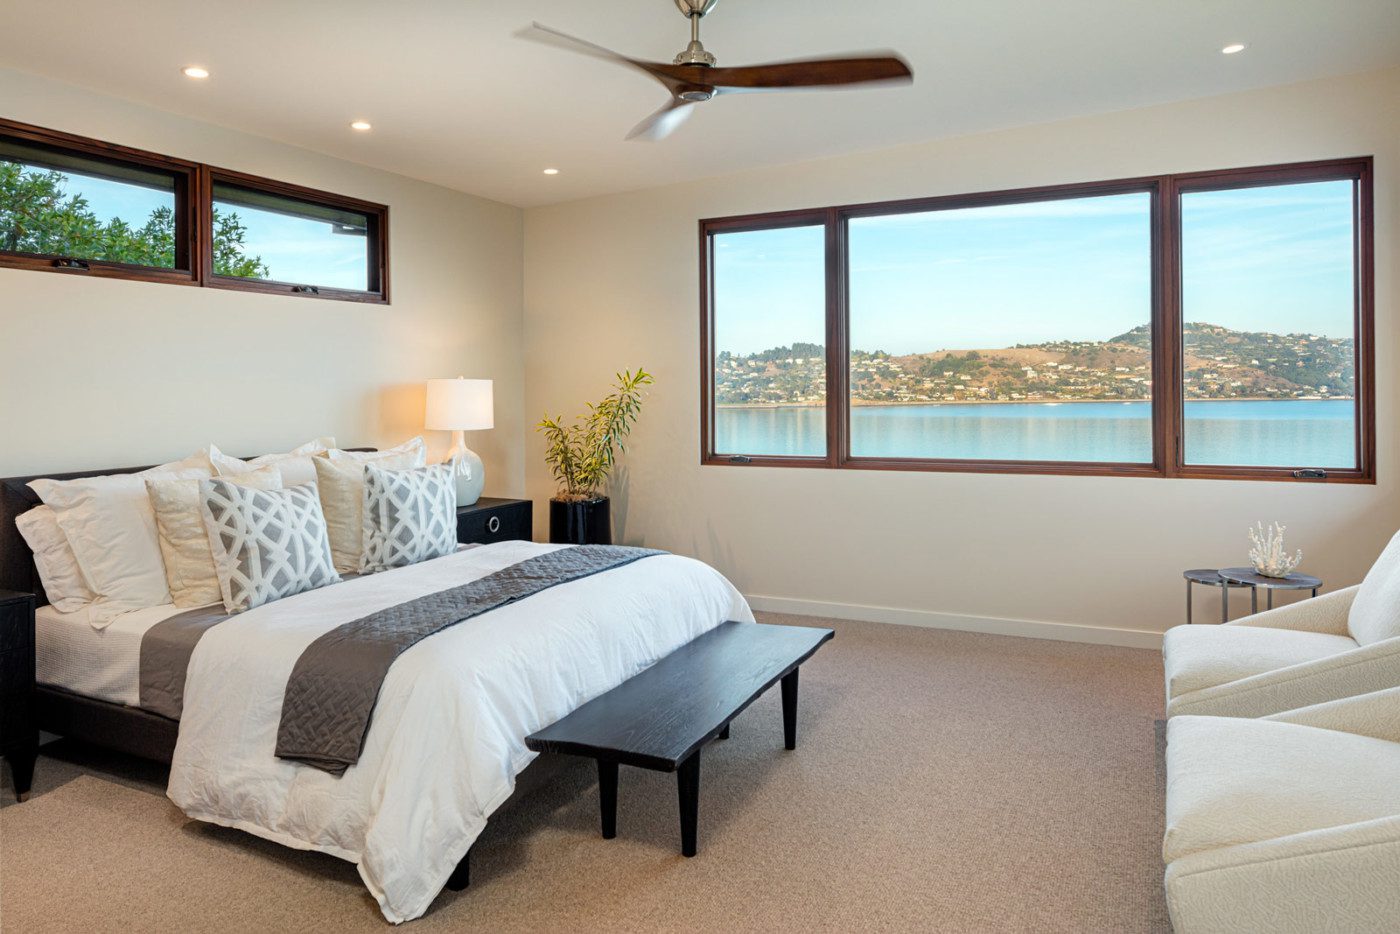 Modern bedroom with view of the bay in mill valley